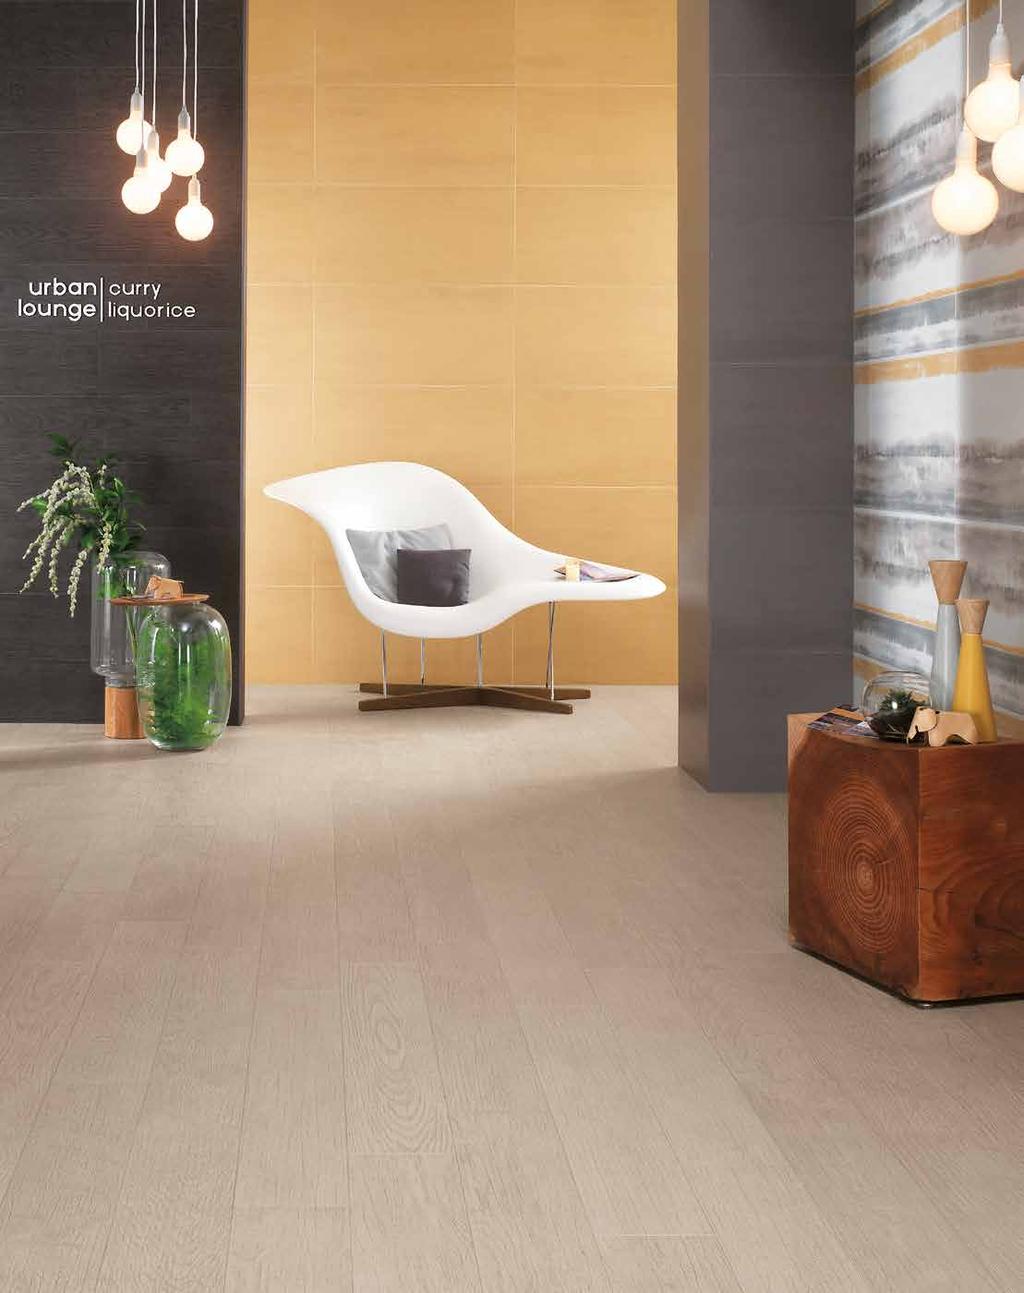 Project Arty&Bord Arty&Bord a design surface project for floors and walls, perfect for residential and commercial spaces where North-European suggestions blend with Italian design.